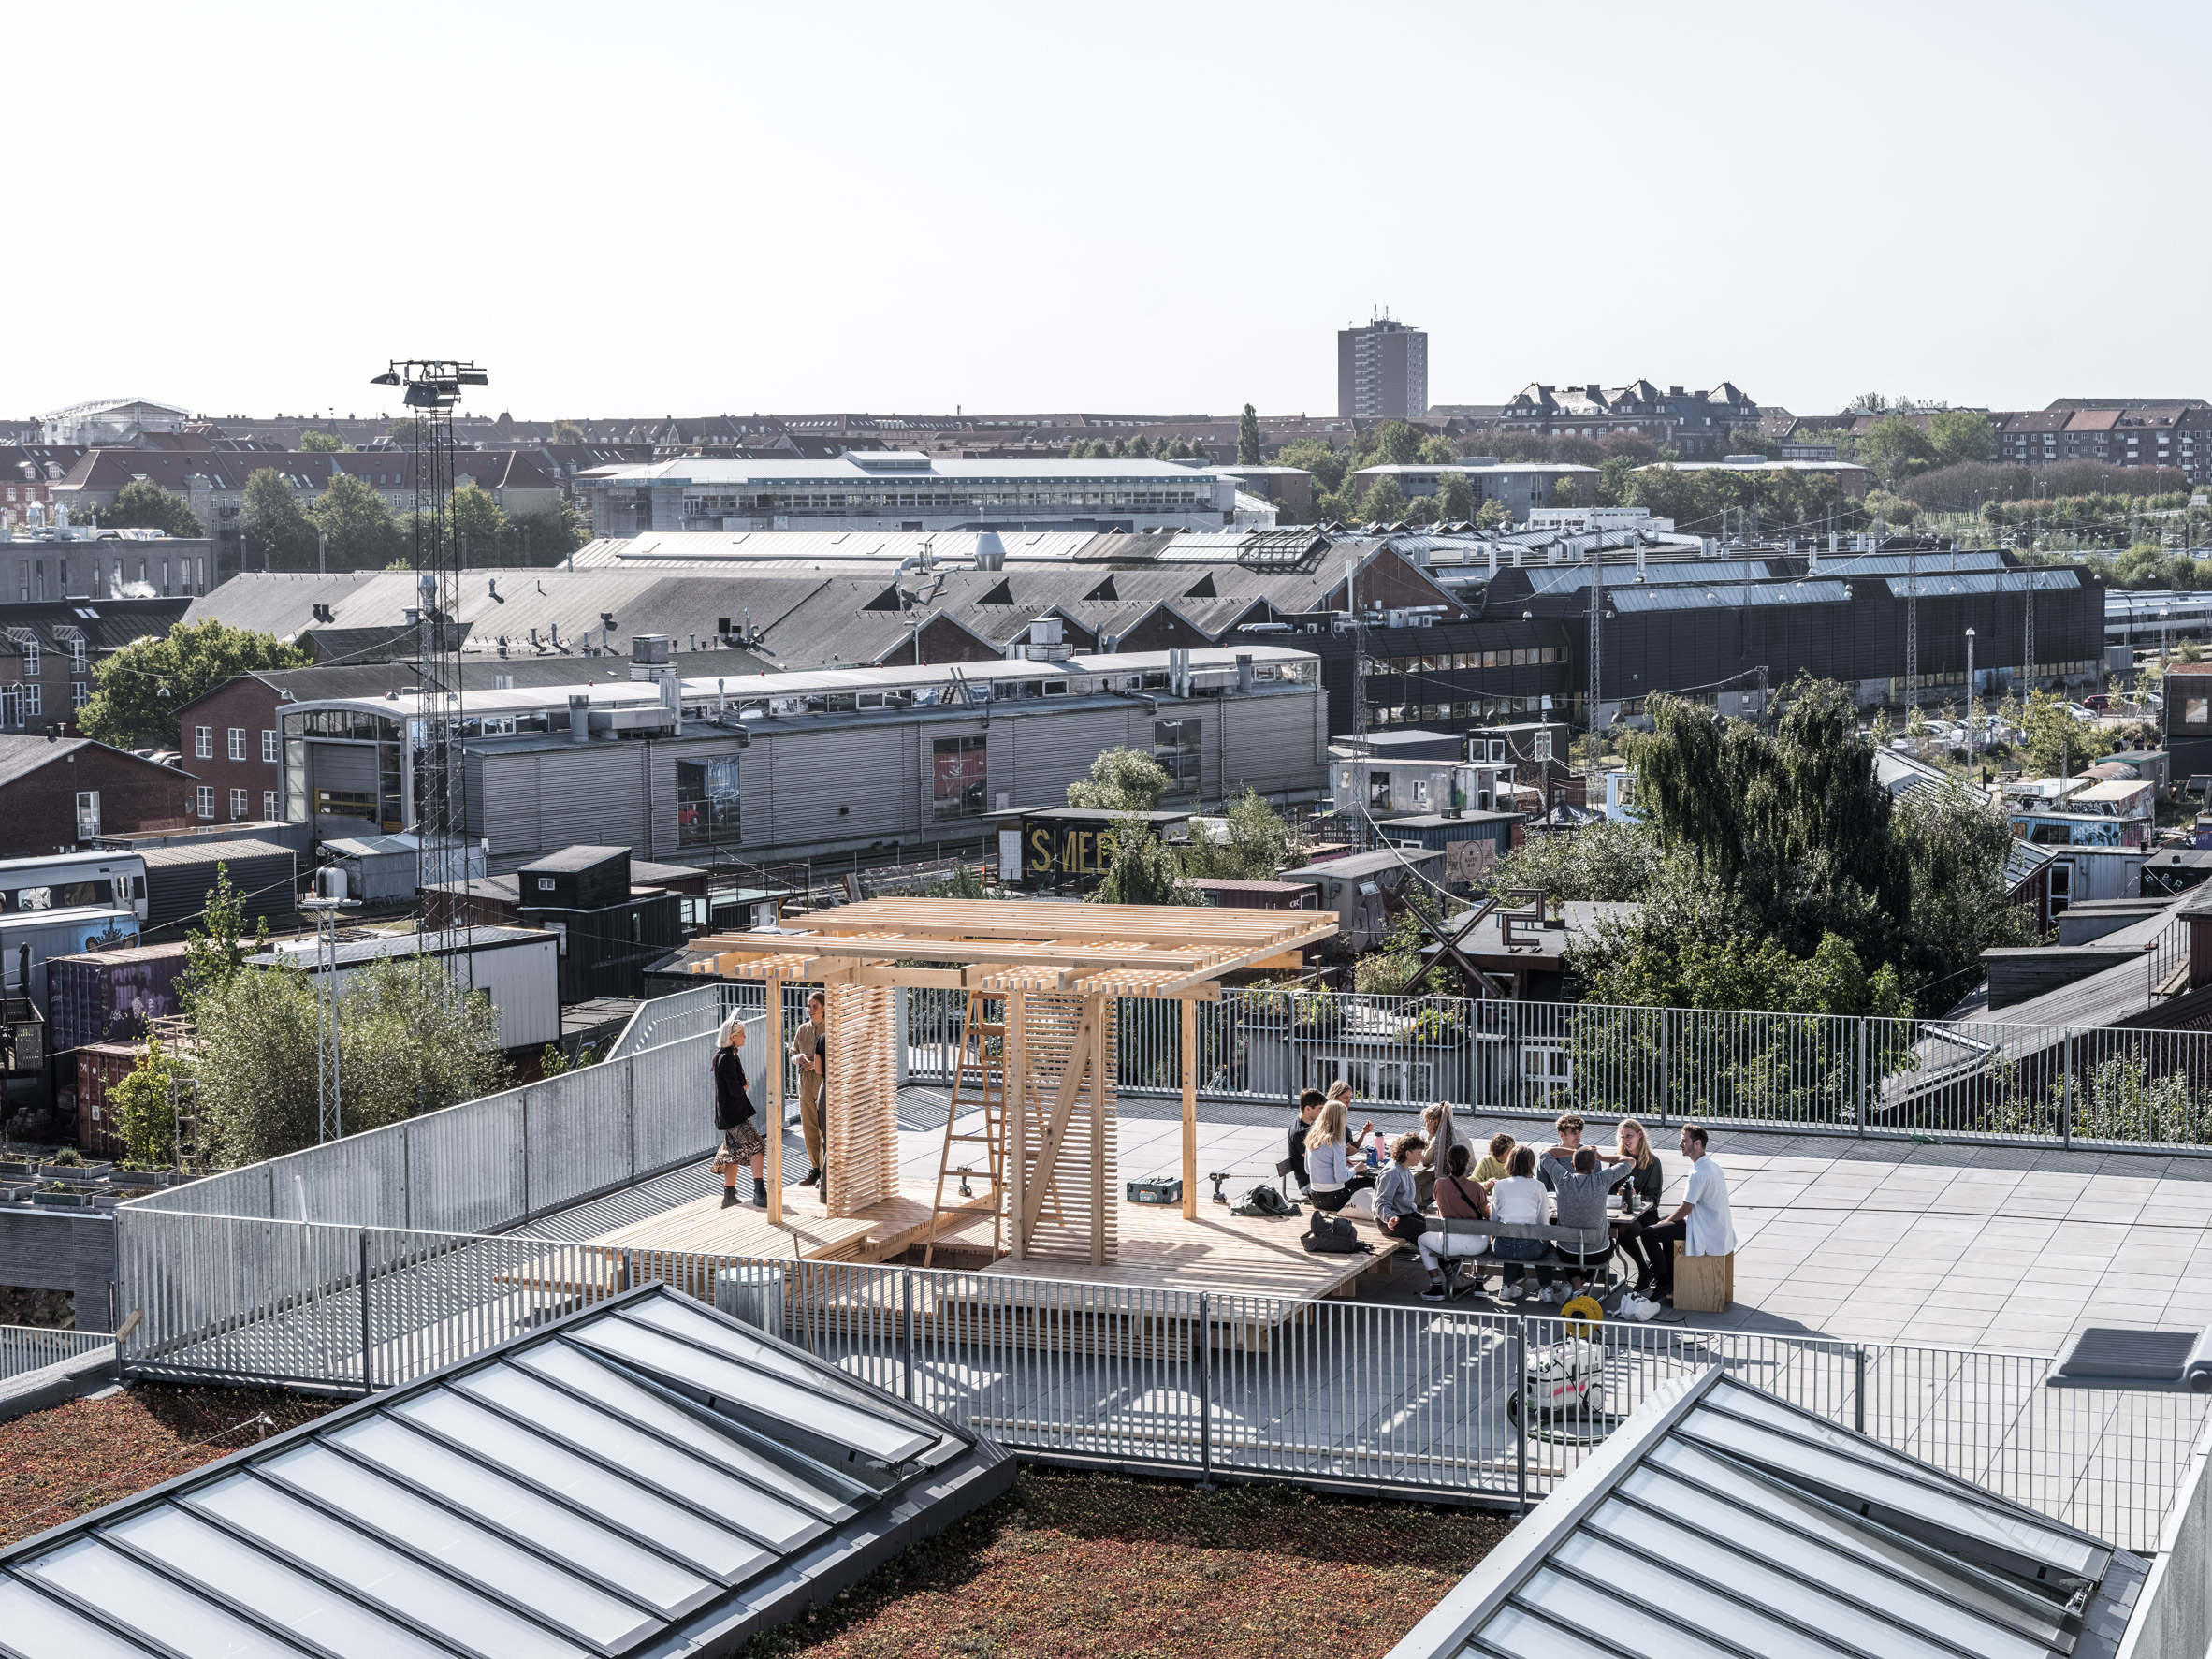 Roof of the new Aarhus School of Architecture building